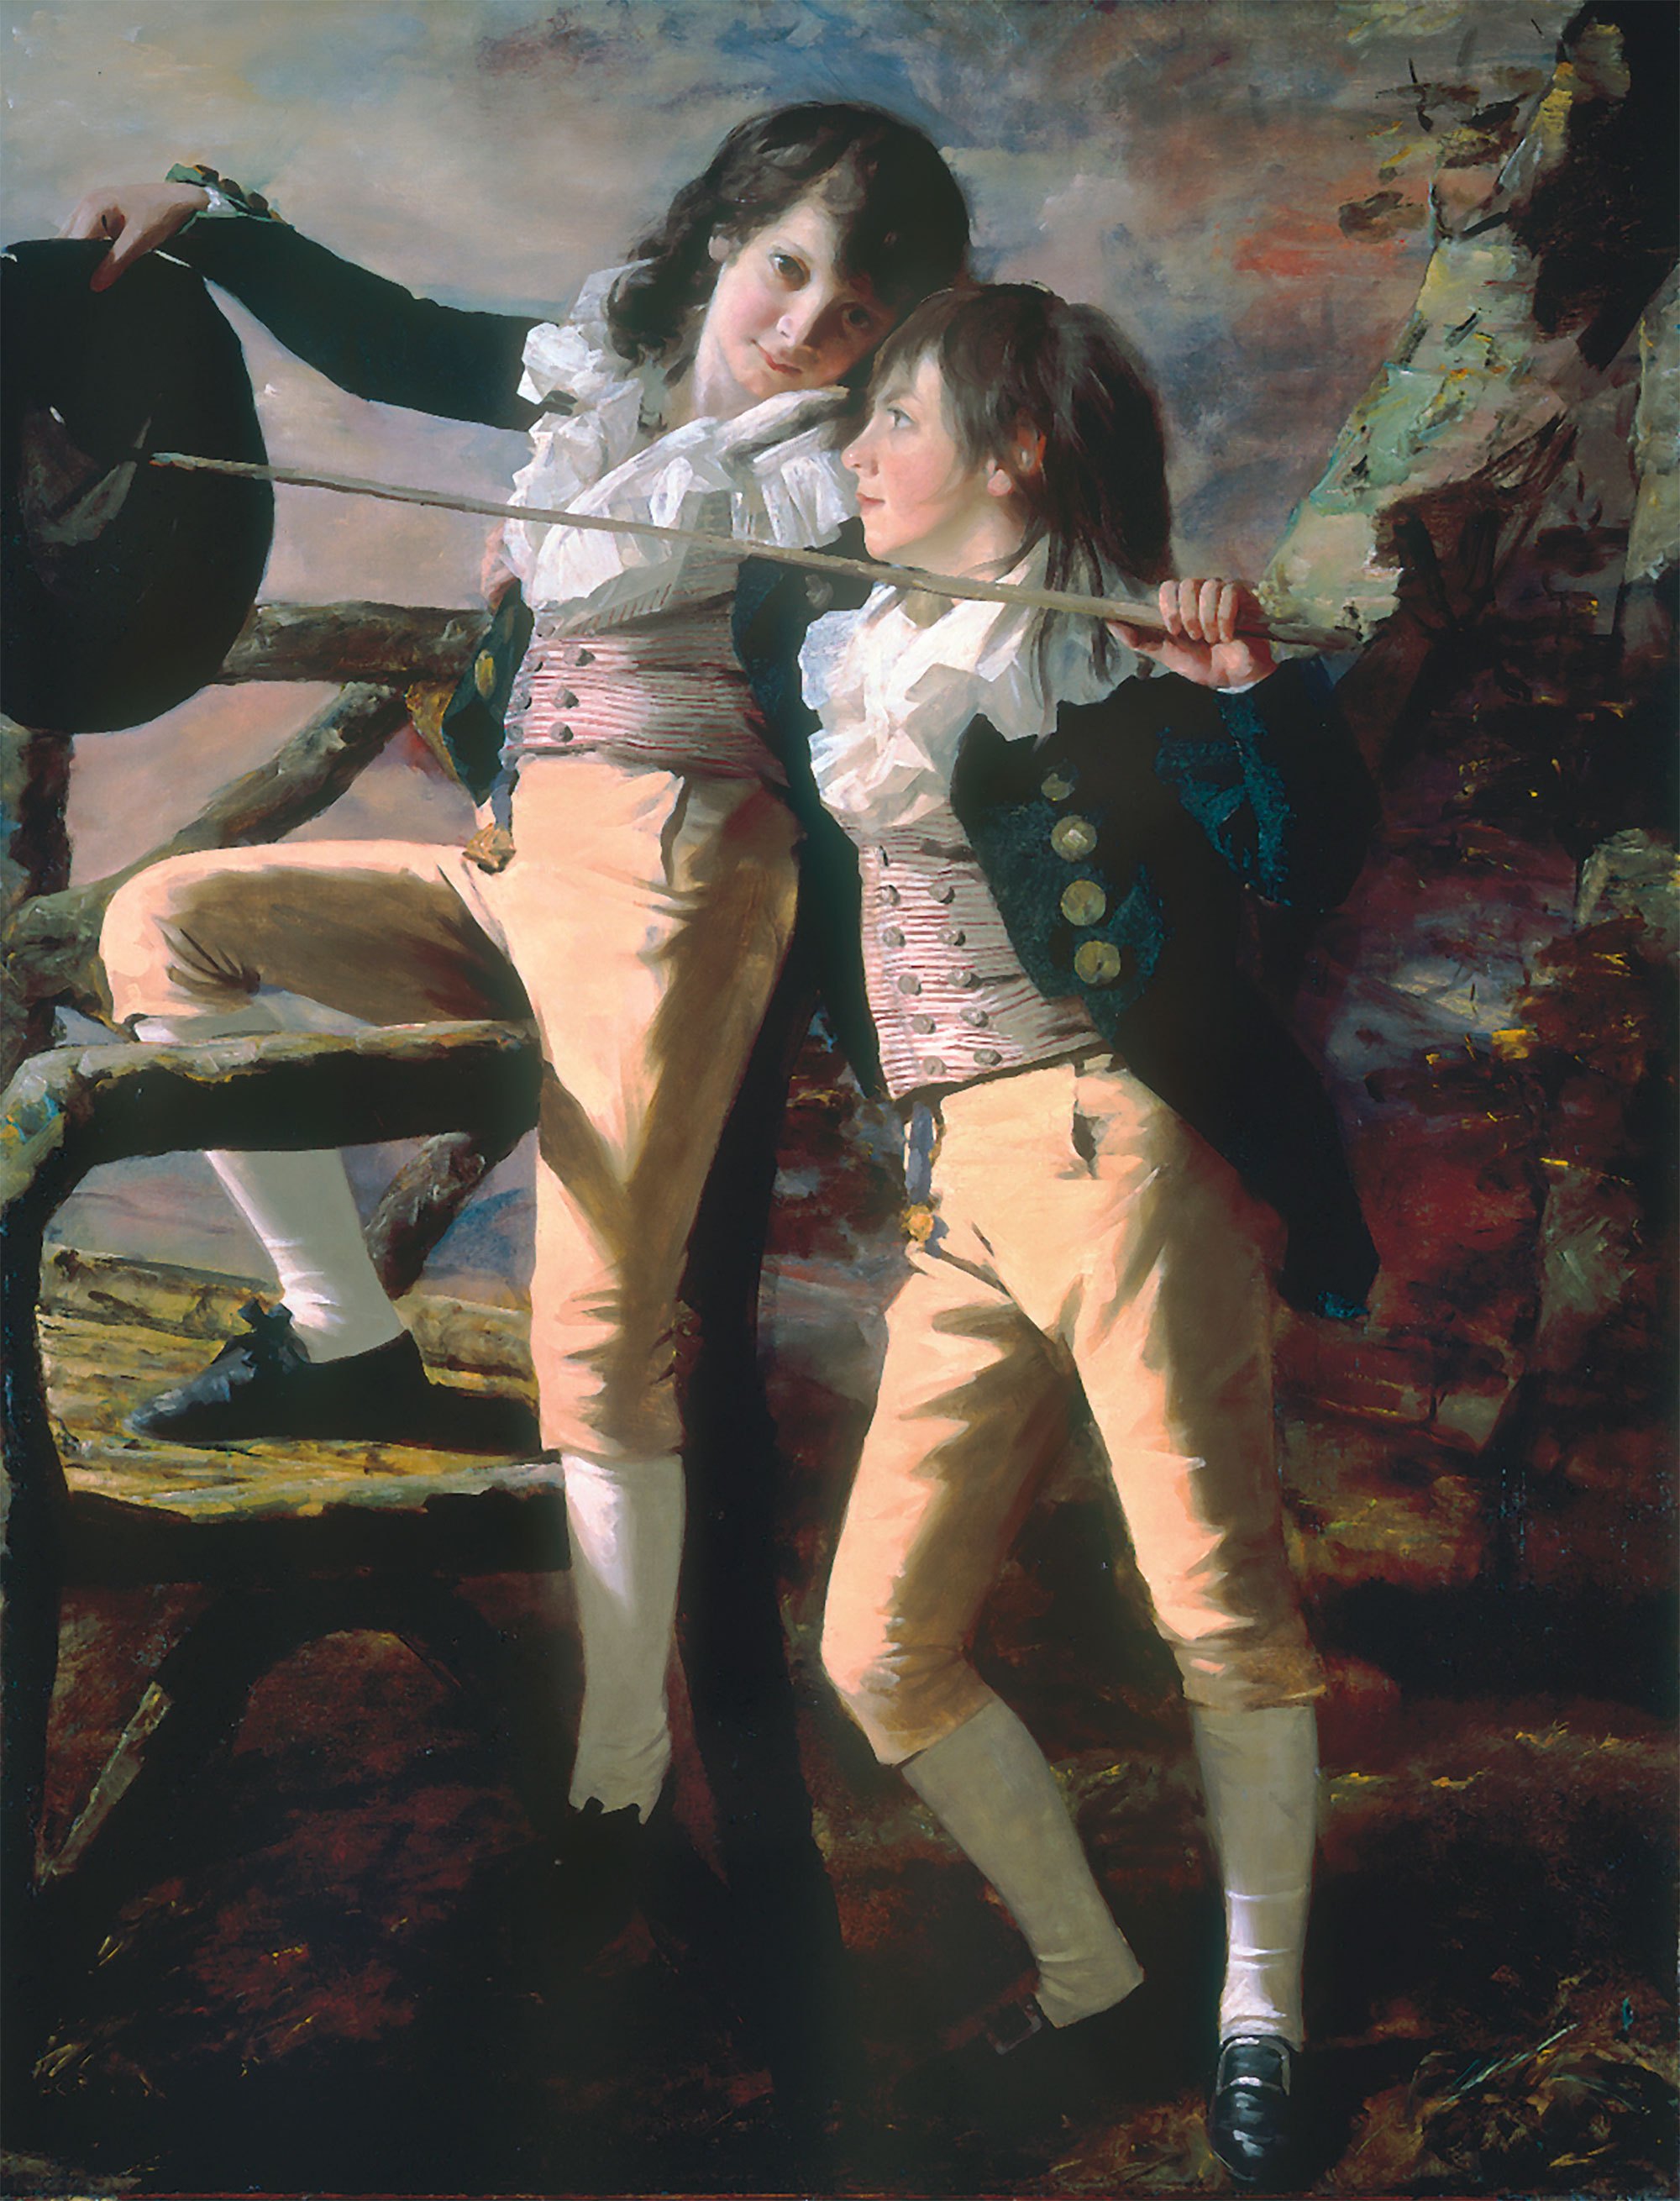 The Allen Brothers (Portrait of James and John Lee Allen) by Henry Raeburn - early 1790s - 152.4 x 115.6 cm Kimbell Art Museum